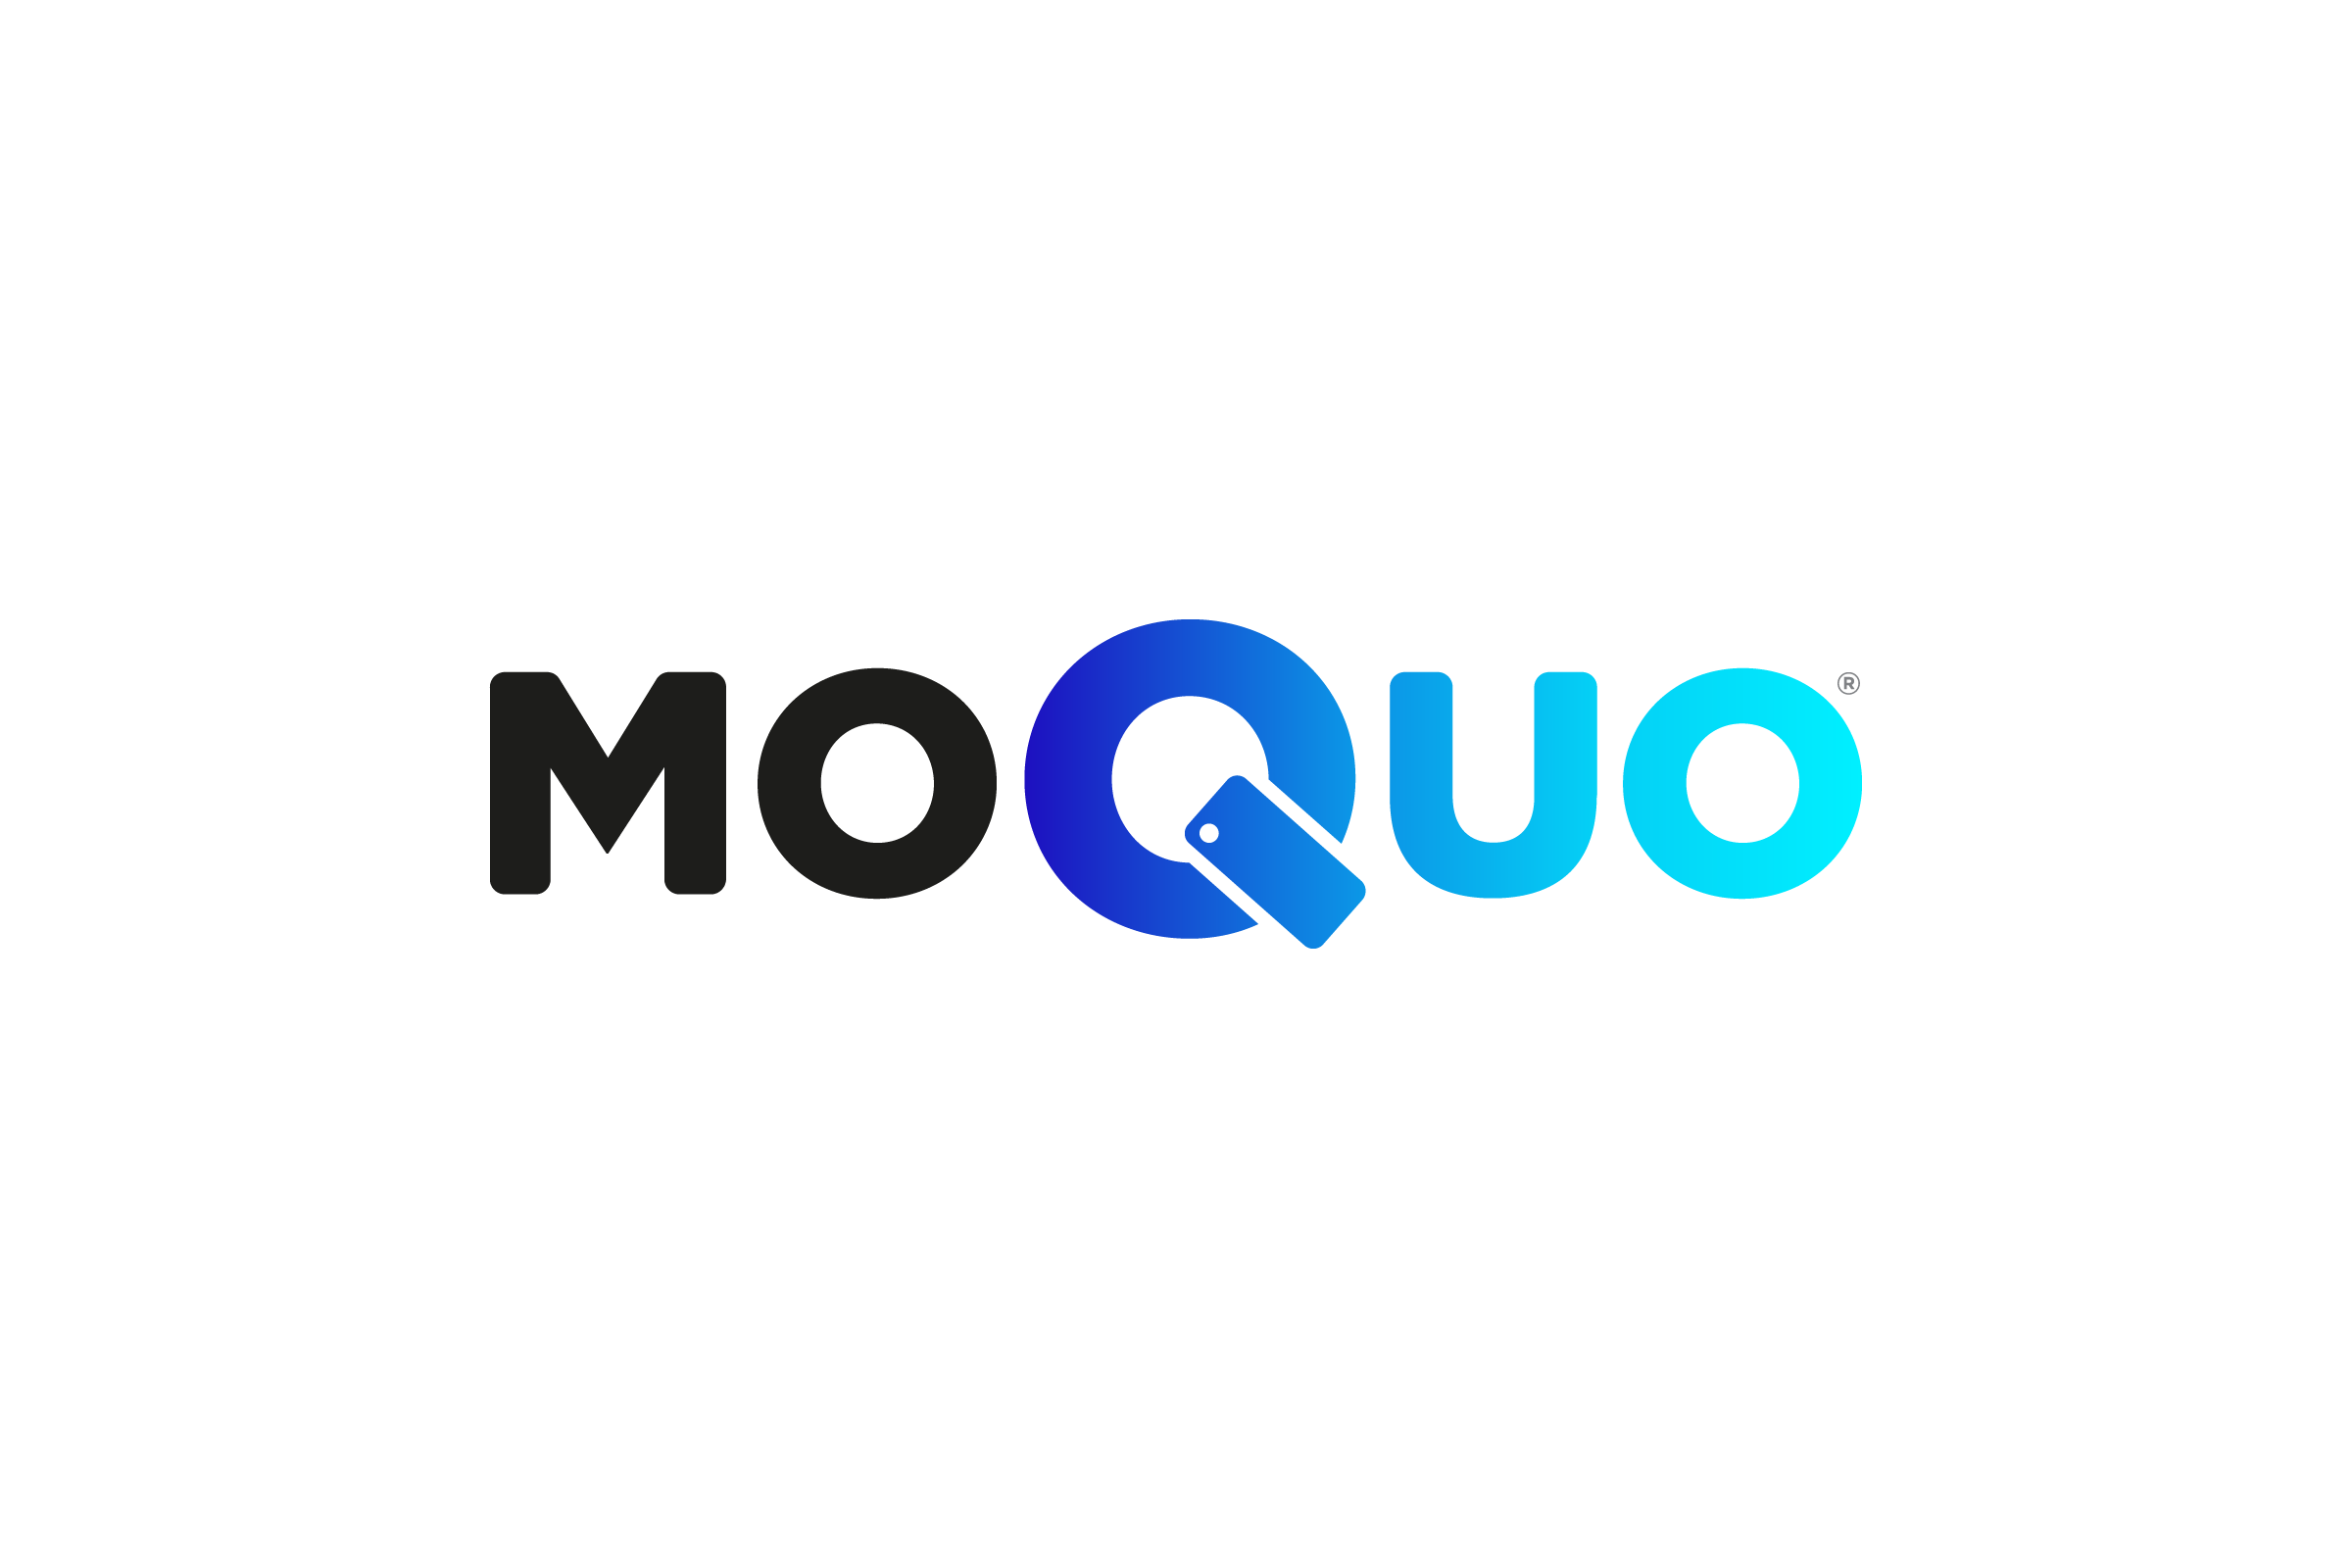 Moquo - Branding and logotype design by Peek Creative Limited